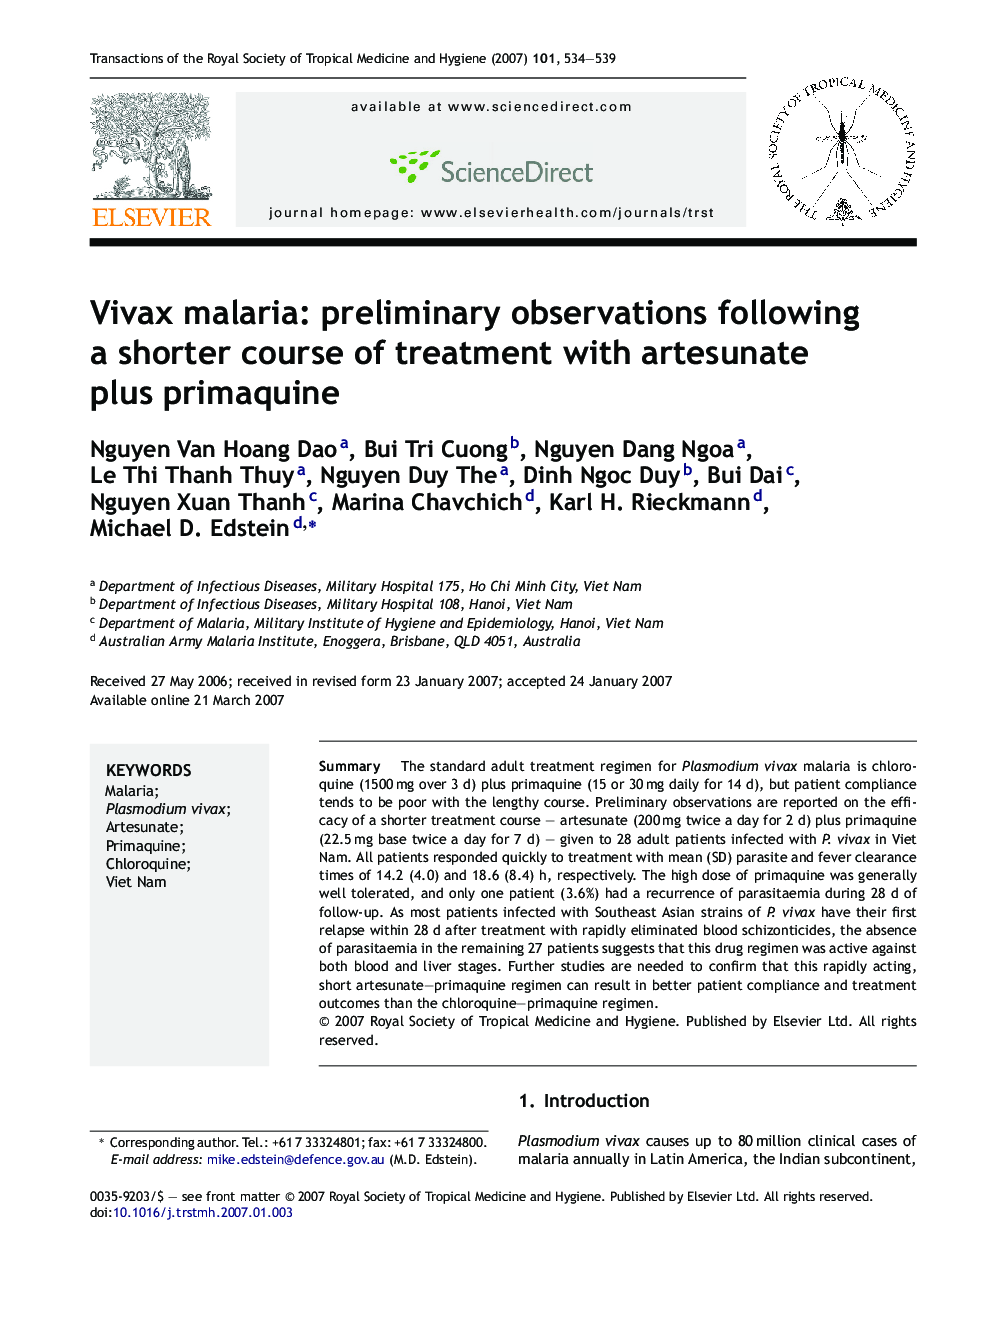 Vivax malaria: preliminary observations following a shorter course of treatment with artesunate plus primaquine